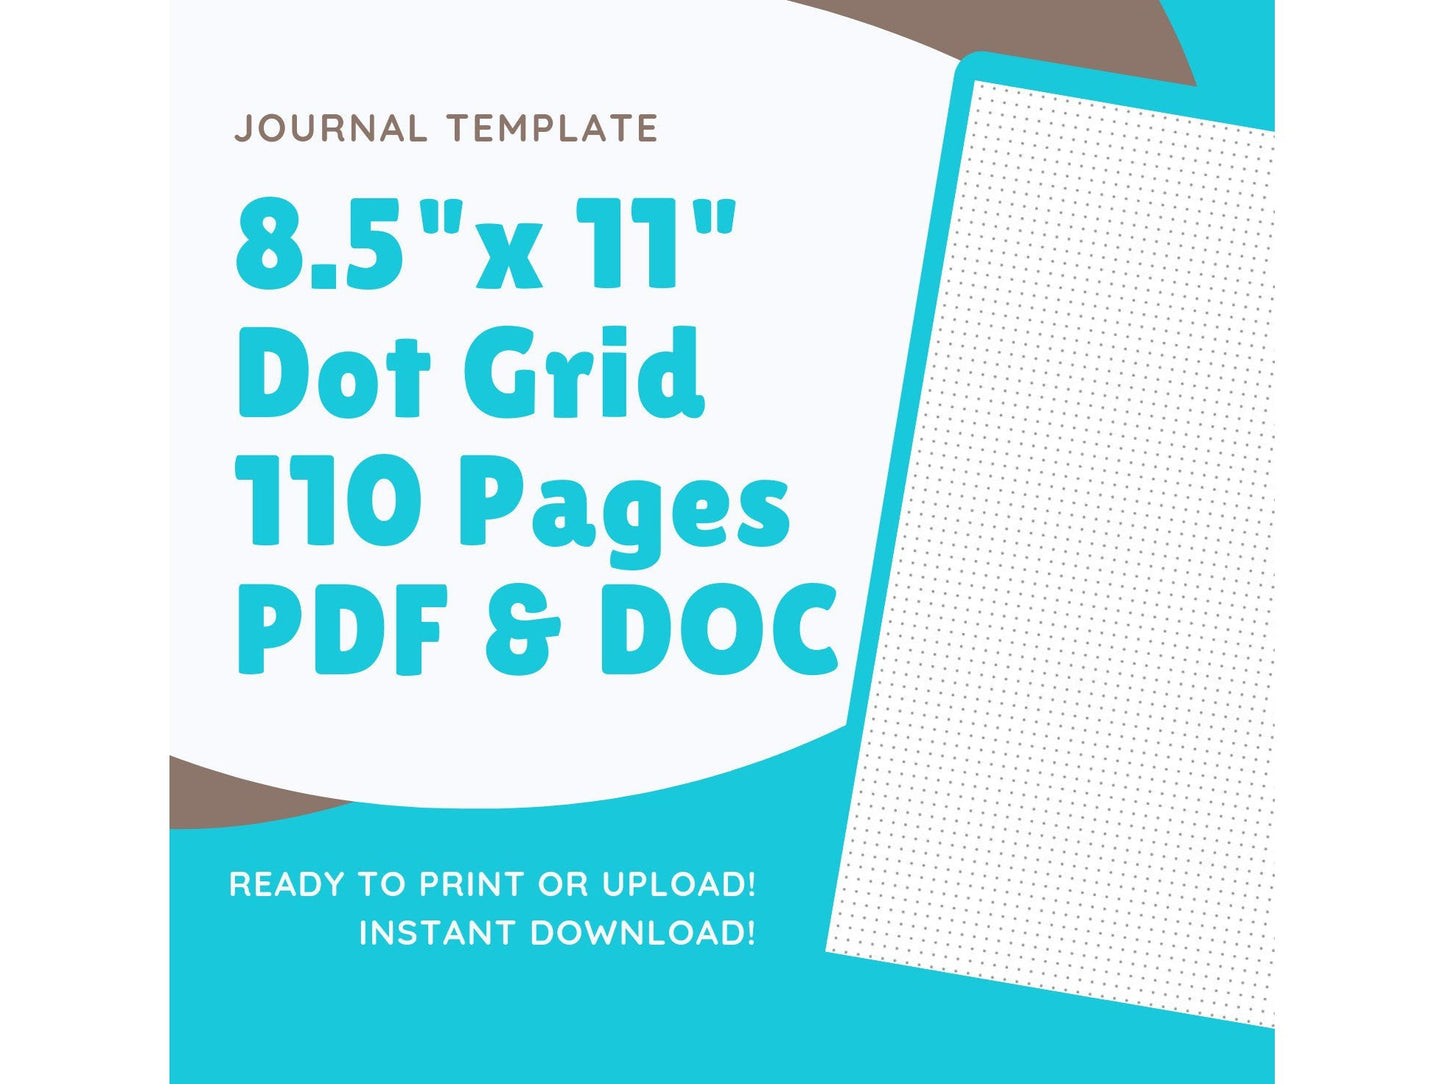 8.5 X 11 Dot Grid Journal Template - KDP Kindle Direct Publishing Ready To Upload